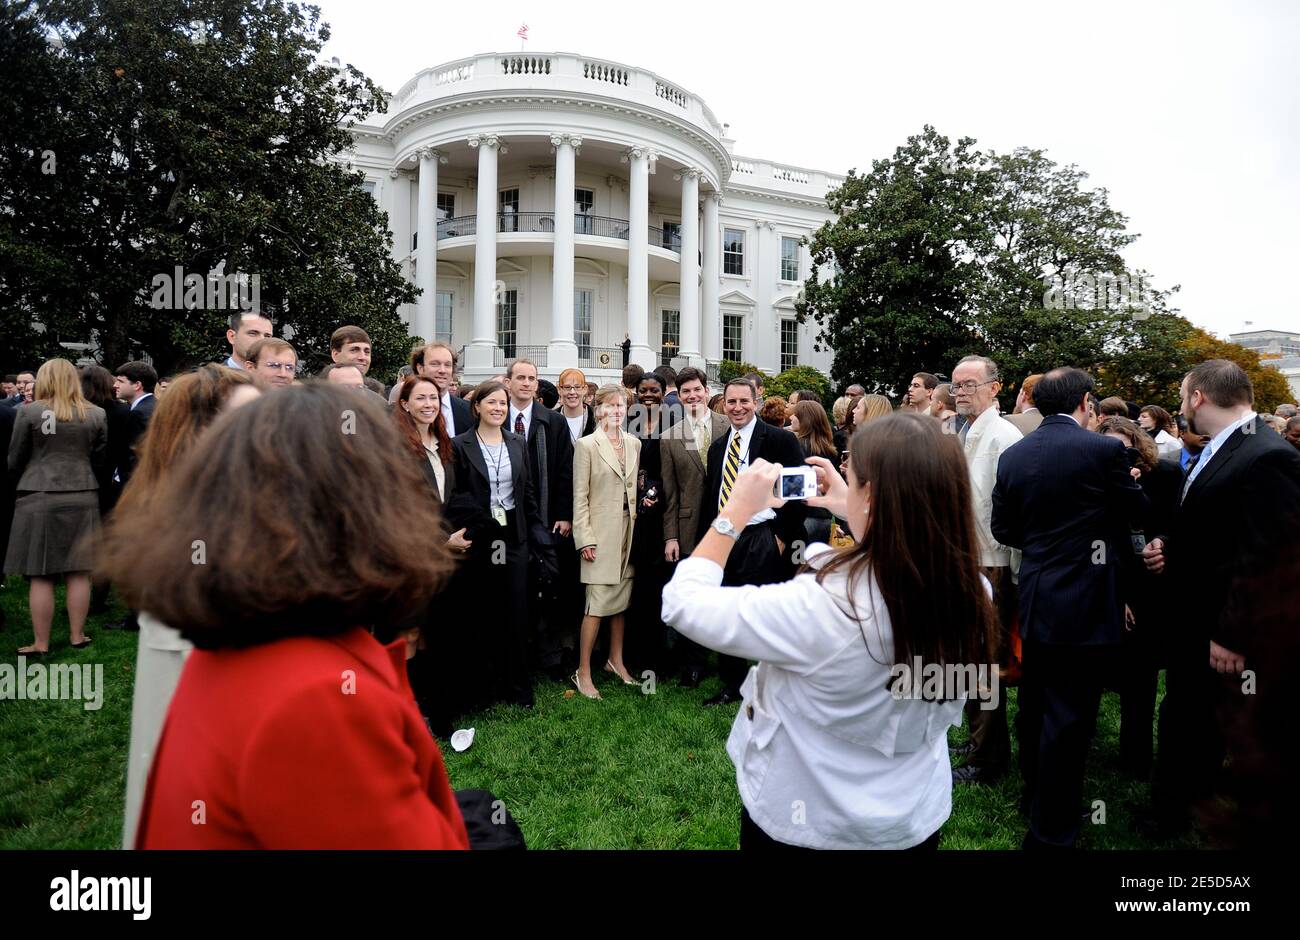 U.S. President George W. Bush 's staff take pictures on the South Lawn of the White House in Washington, DC, USA on November 6, 2008. Photo by Olivier Douliery/ABACAUSA.COM Stock Photo